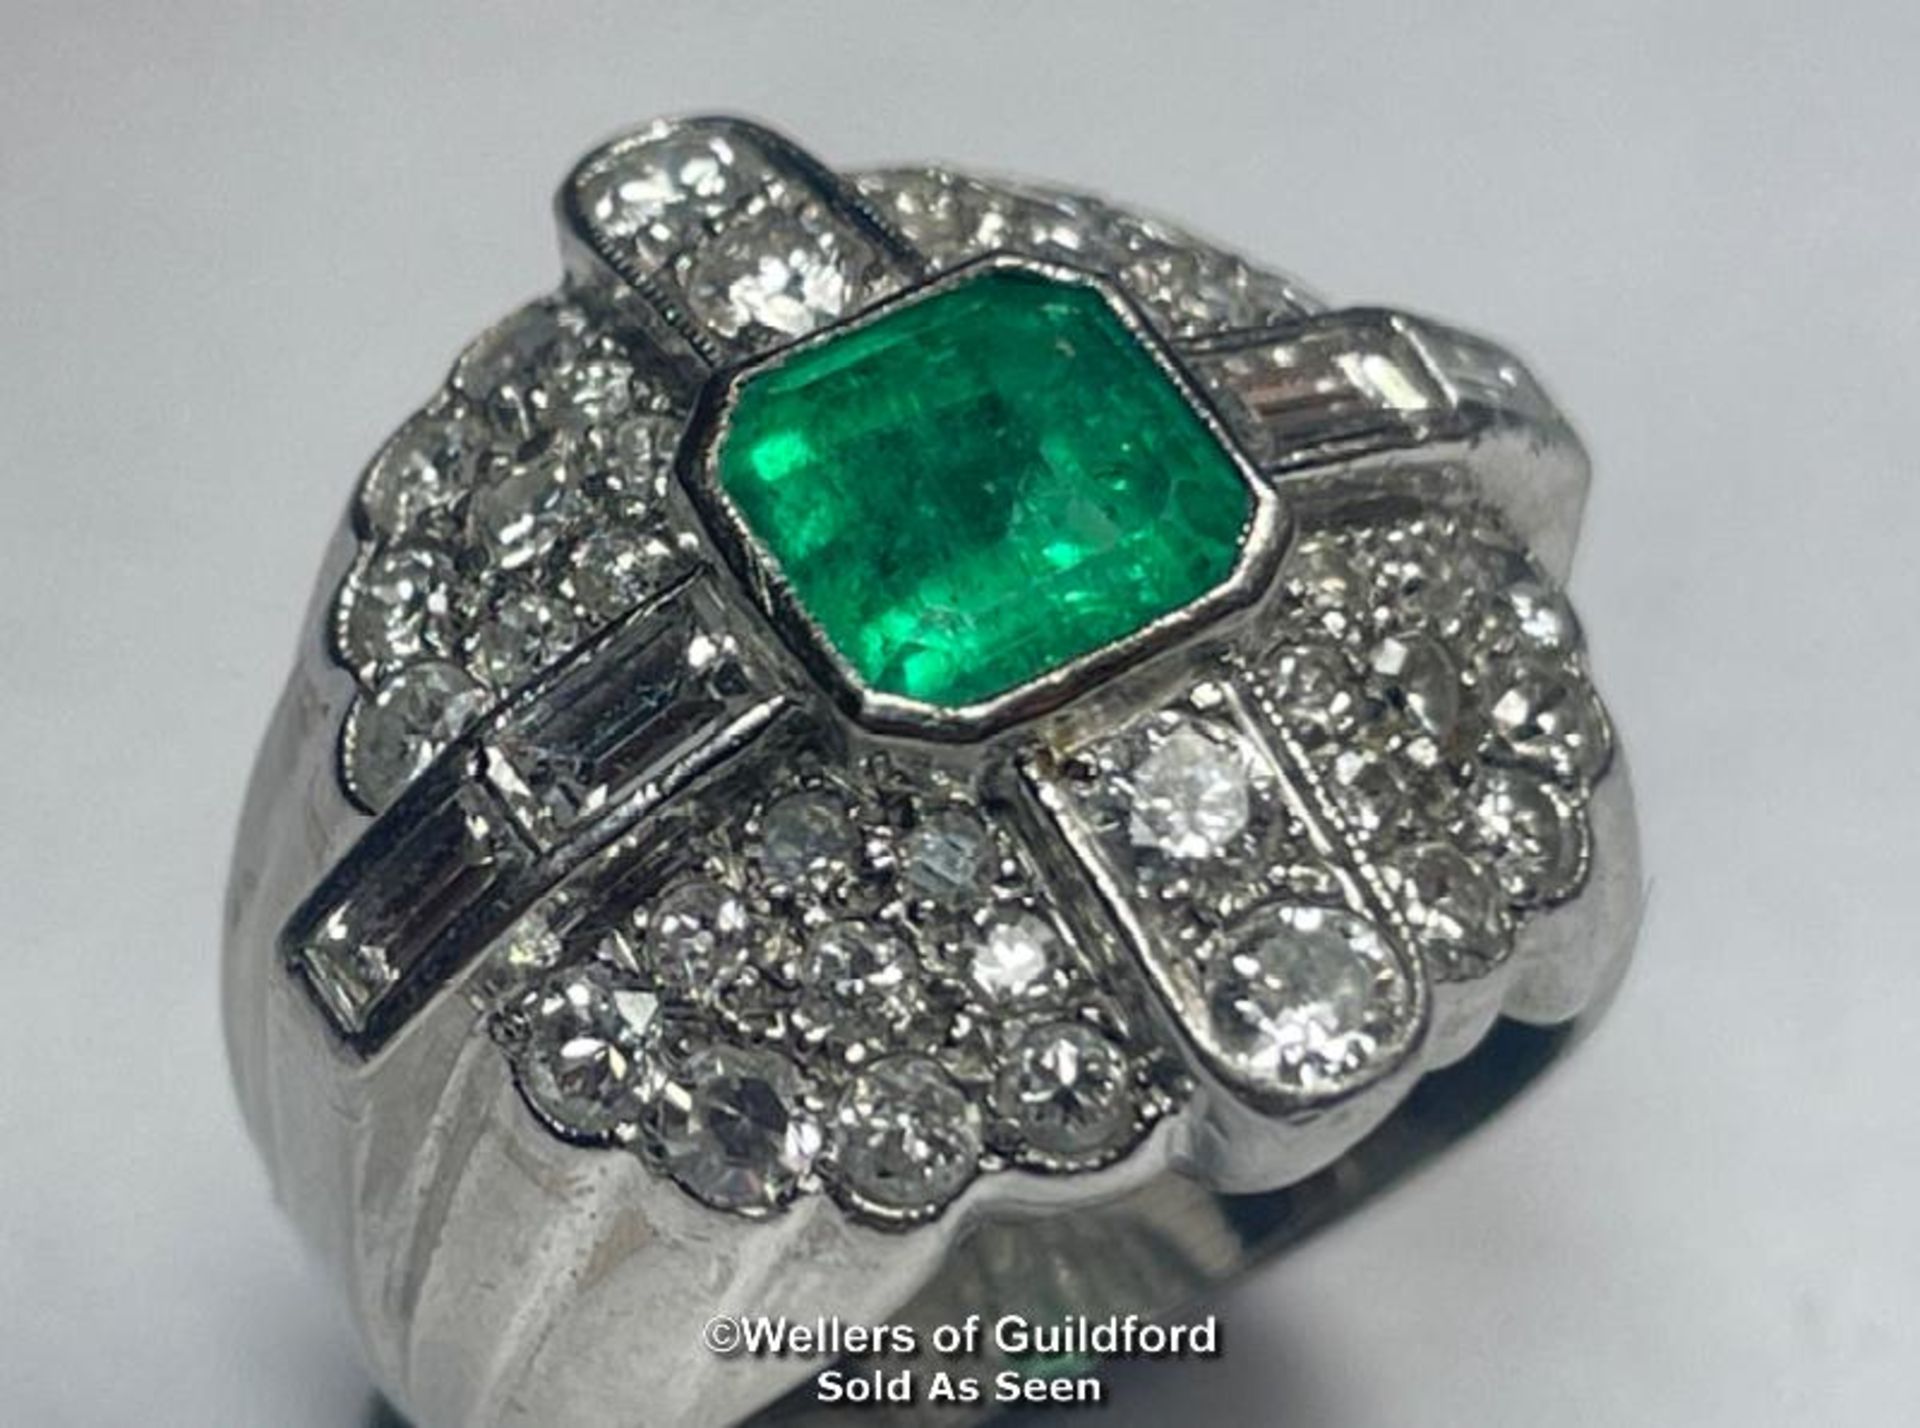 Emerald and diamond ring stamped PT950, set with round brilliant cut, single cut and baguette cut